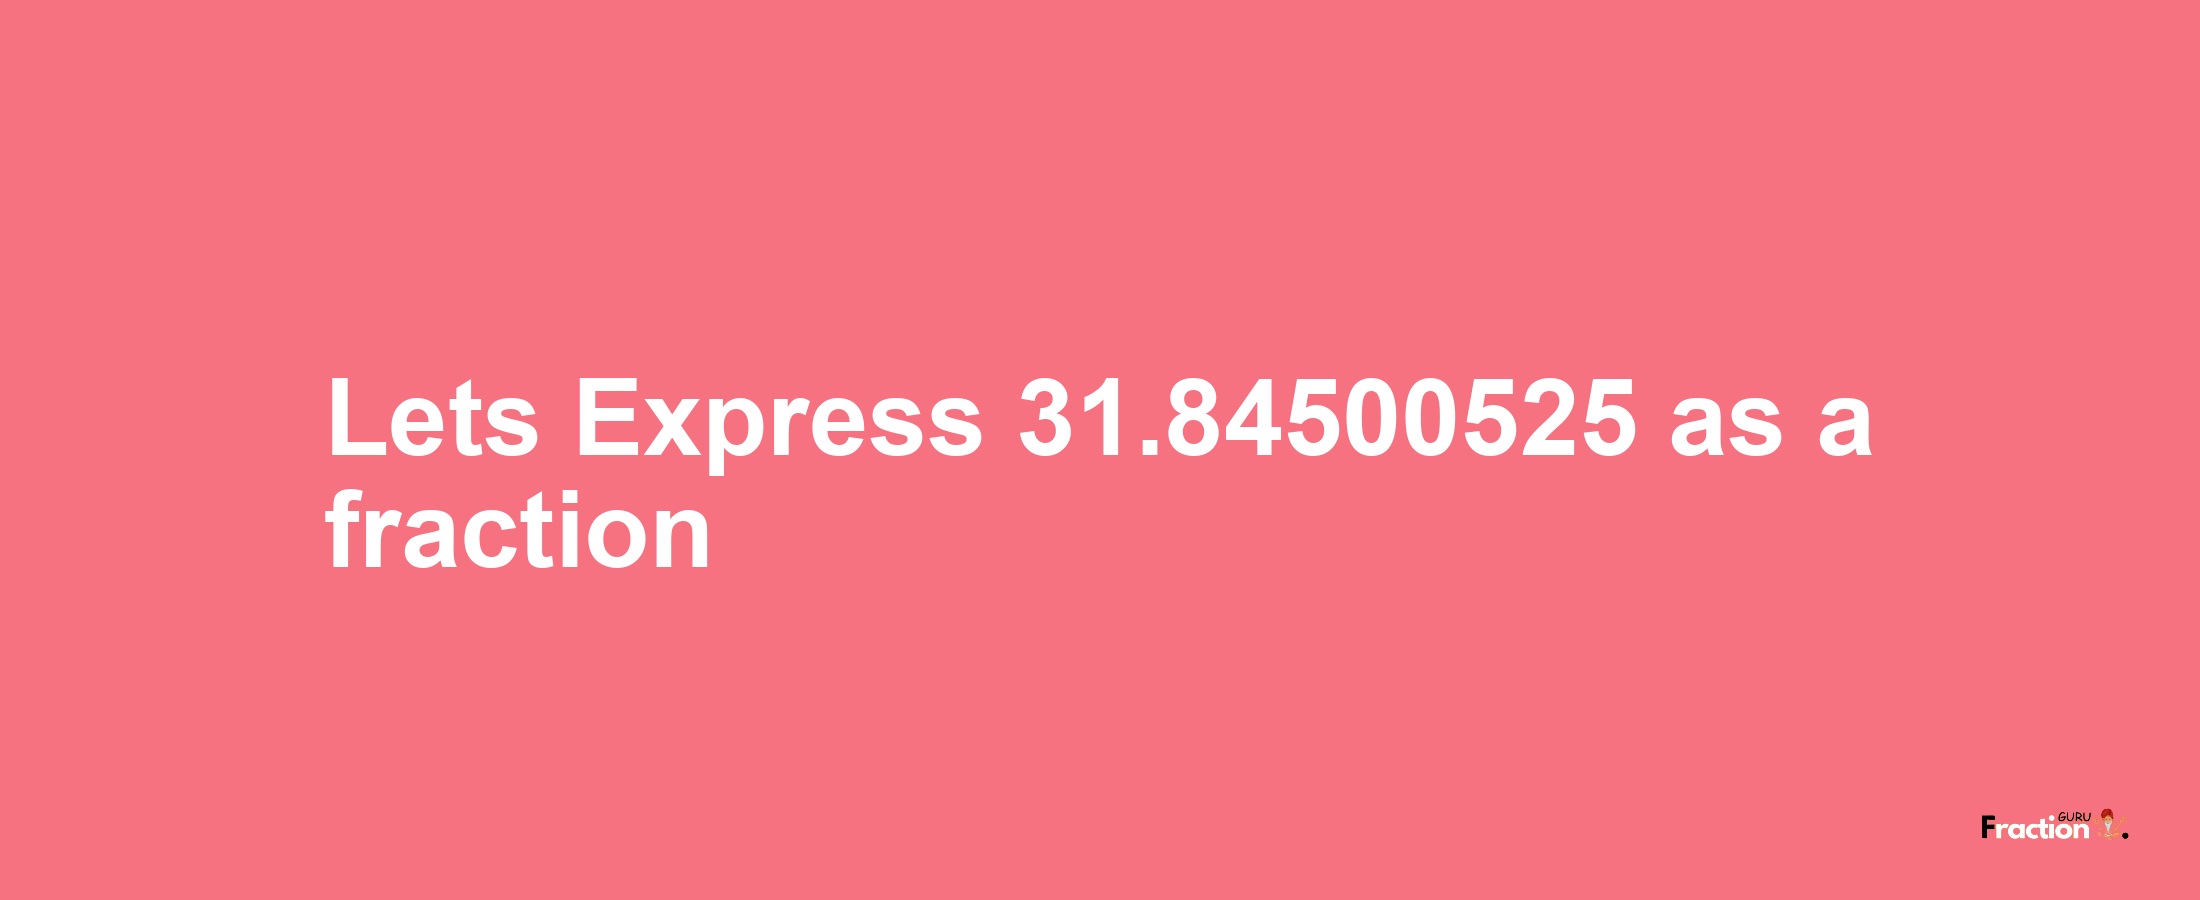 Lets Express 31.84500525 as afraction